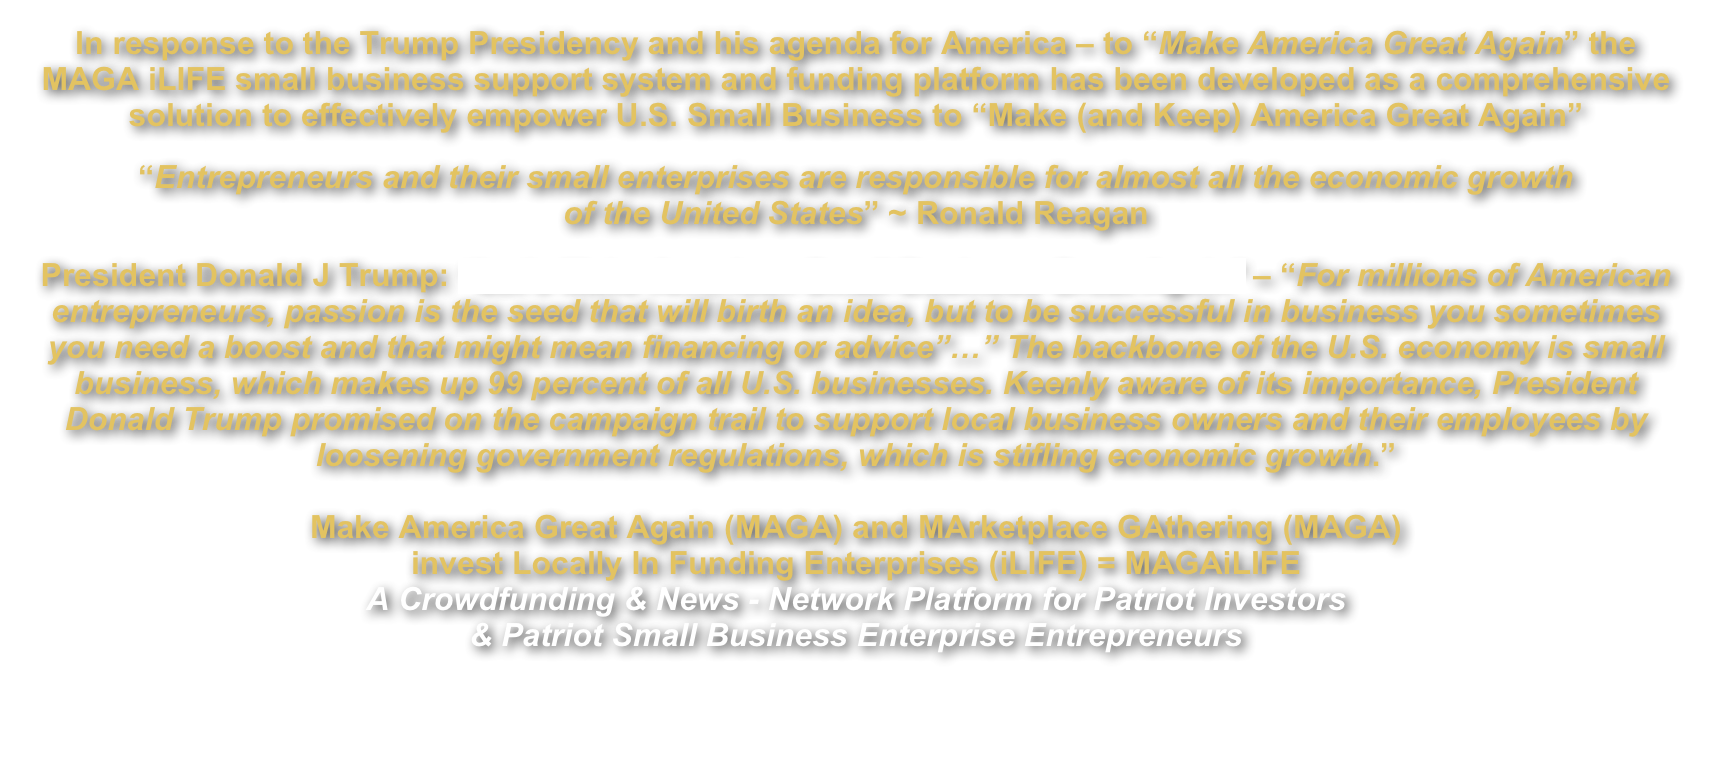 In response to the Trump Presidency and his agenda for America – to “Make America Great Again” the MAGA iLIFE small business support system and funding platform has been developed as a comprehensive solution to effectively empower U.S. Small Business to “Make (and Keep) America Great Again”
“Entrepreneurs and their small enterprises are responsible for almost all the economic growth  of the United States” ~ Ronald Reagan
President Donald J Trump: “Let’s Make American Small Business Great Again” – “For millions of American entrepreneurs, passion is the seed that will birth an idea, but to be successful in business you sometimes you need a boost and that might mean financing or advice”…” The backbone of the U.S. economy is small business, which makes up 99 percent of all U.S. businesses. Keenly aware of its importance, President Donald Trump promised on the campaign trail to support local business owners and their employees by loosening government regulations, which is stifling economic growth.”  
Make America Great Again (MAGA) and MArketplace GAthering (MAGA) invest Locally In Funding Enterprises (iLIFE) = MAGAiLIFE A Crowdfunding & News - Network Platform for Patriot Investors  & Patriot Small Business Enterprise Entrepreneurs 
                                                           Click Buttons Below